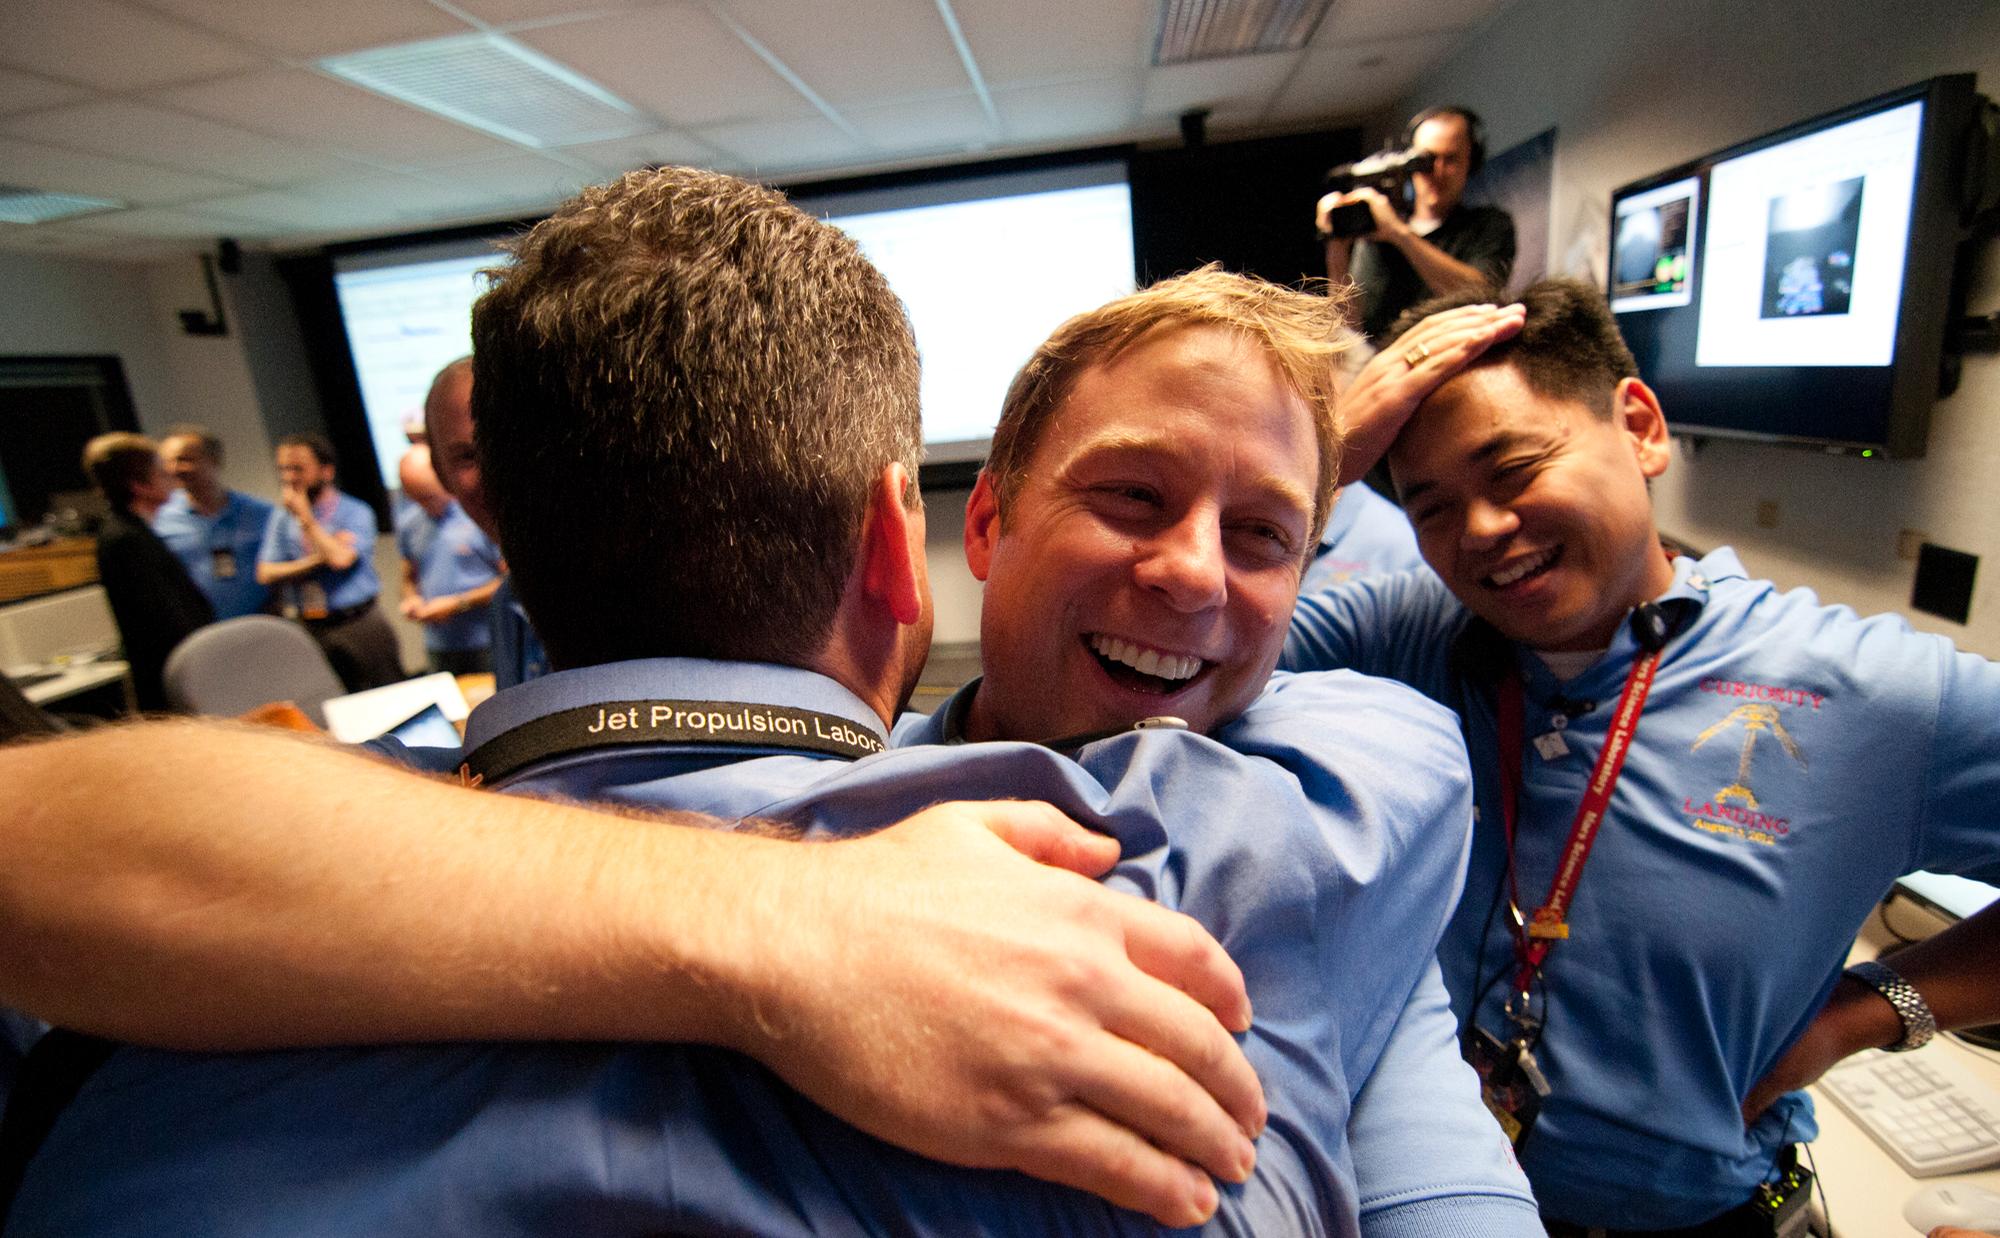 The Entry, Descent and Landing team celebrate just moments after news that Curiosity landed safely on Mars.